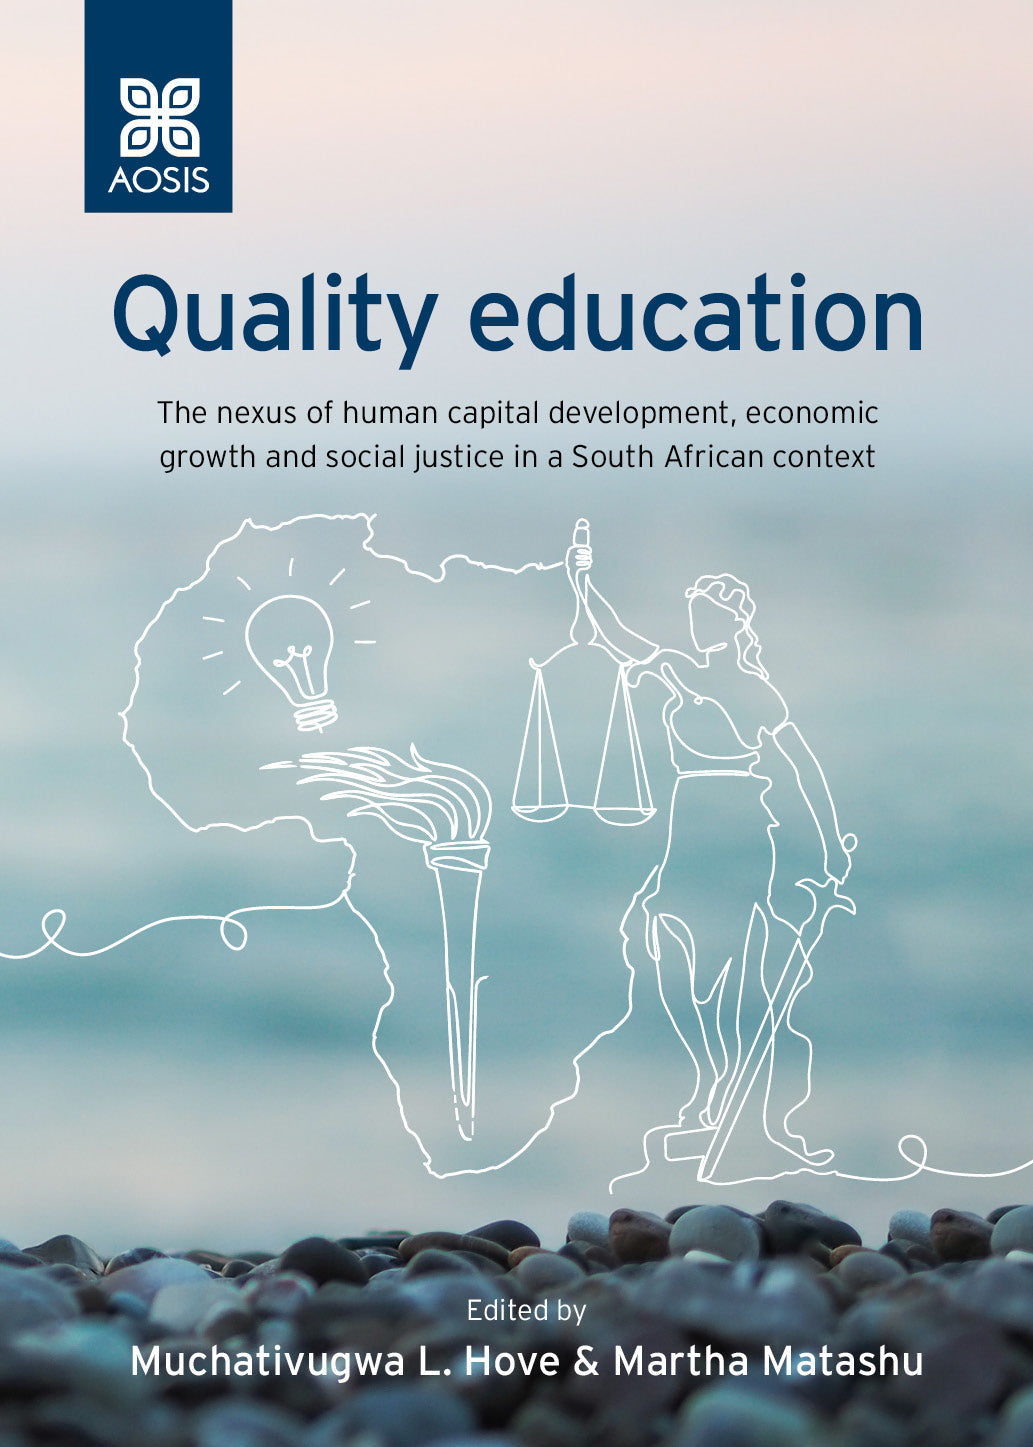 Quality education: The nexus of human capital development, economic growth and social justice in a South African context (ePub Digital Downloads)